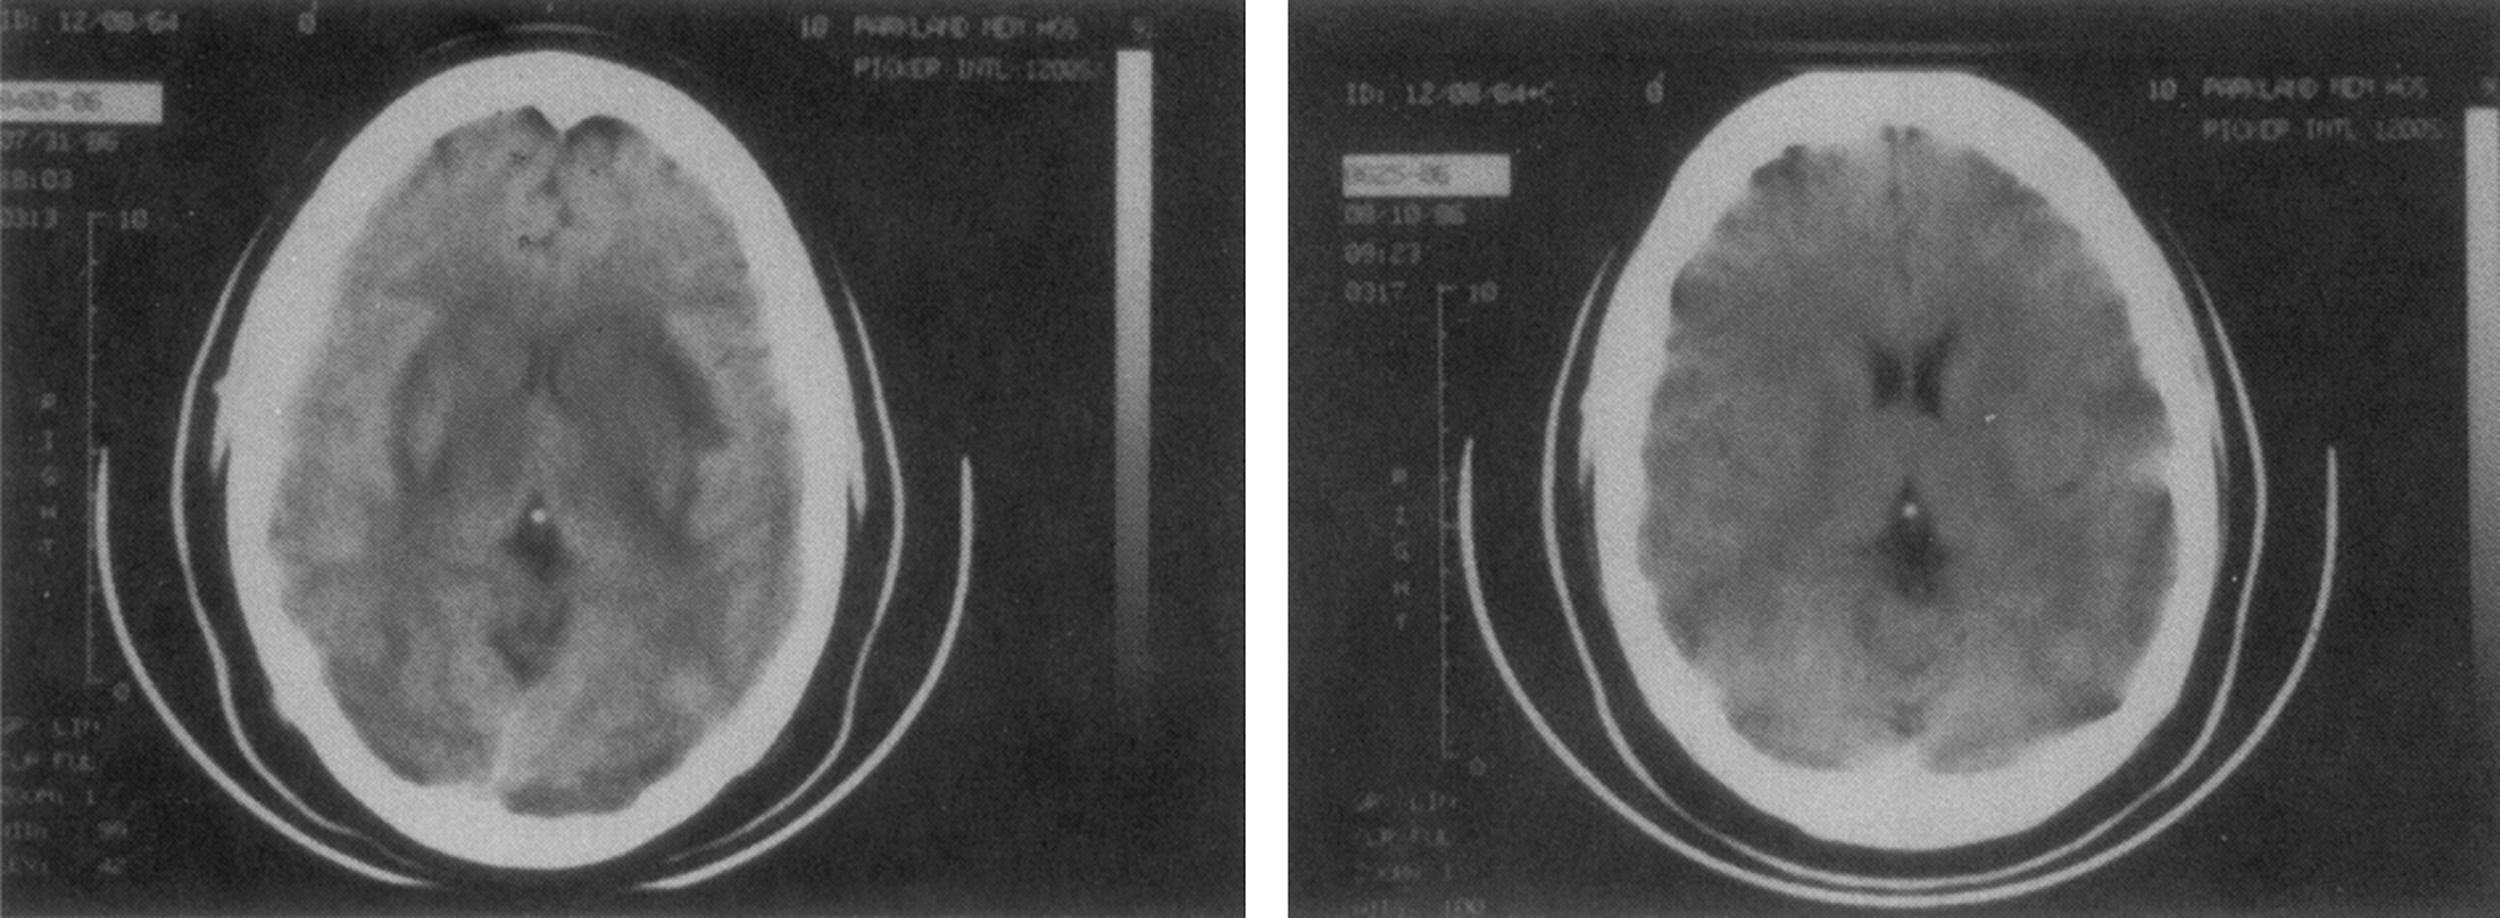 Figure 13.6, Computed tomographs in a woman with cerebral edema following acutely exacerbated severe hypertension. The radiograph on the left shows slit-like effaced ventricles as well as sharply demarcated gray–white interface, both indicating parenchymal swelling. The radiograph on the right taken 10 days later shows diminished edema manifest by larger ventricles and loss of gray–white interface demarcation.